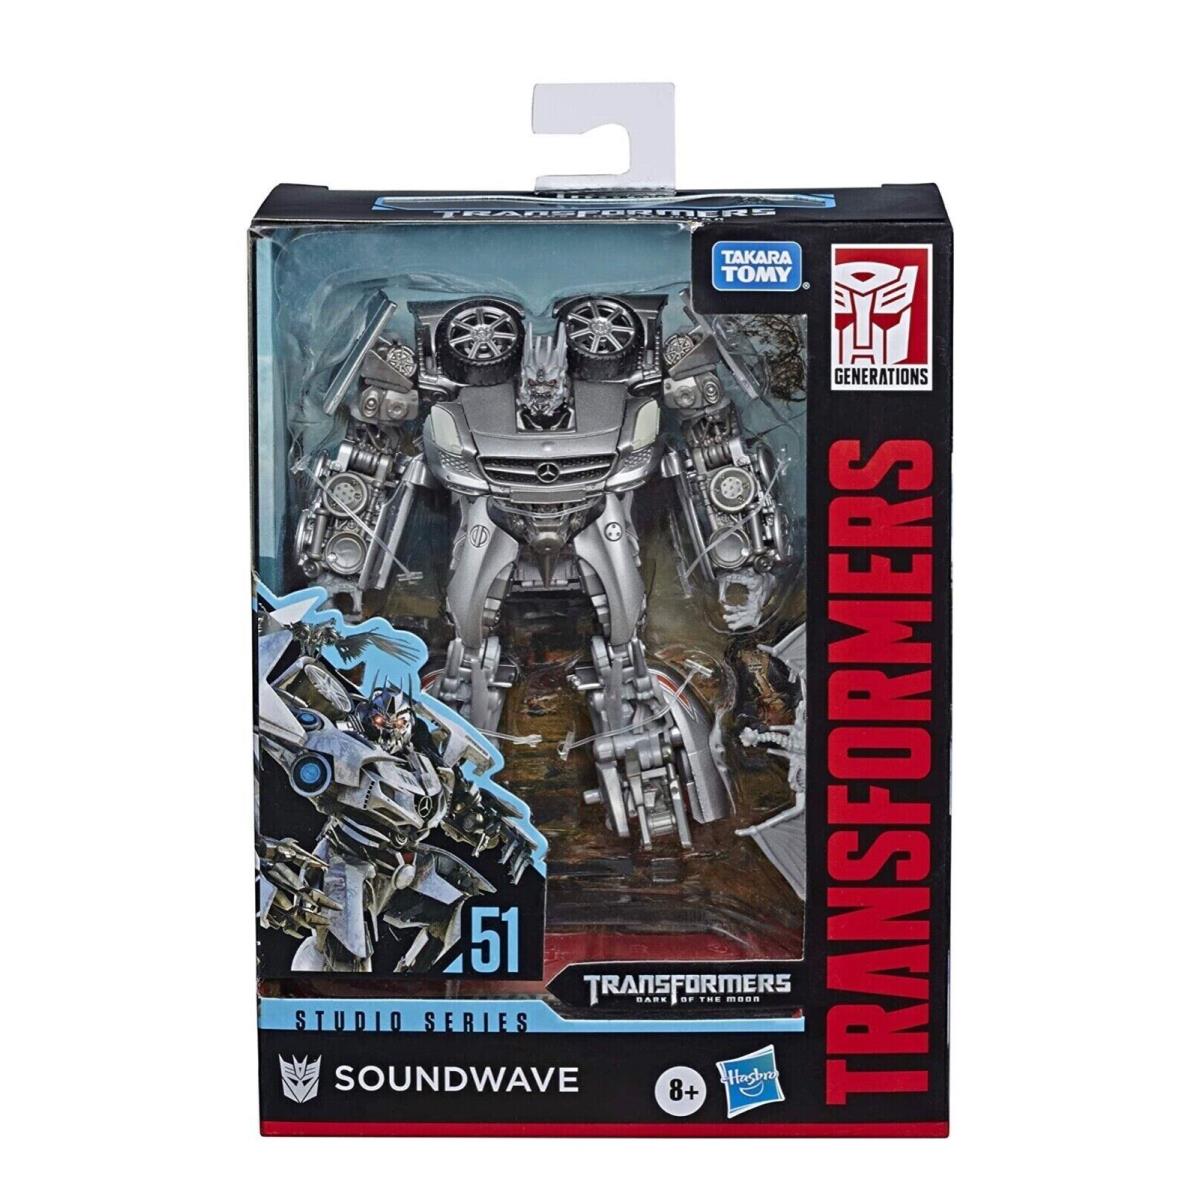 Transformers Toy Studio Series 51 Deluxe Class Dark The Moon Movie Soundwave - Silver